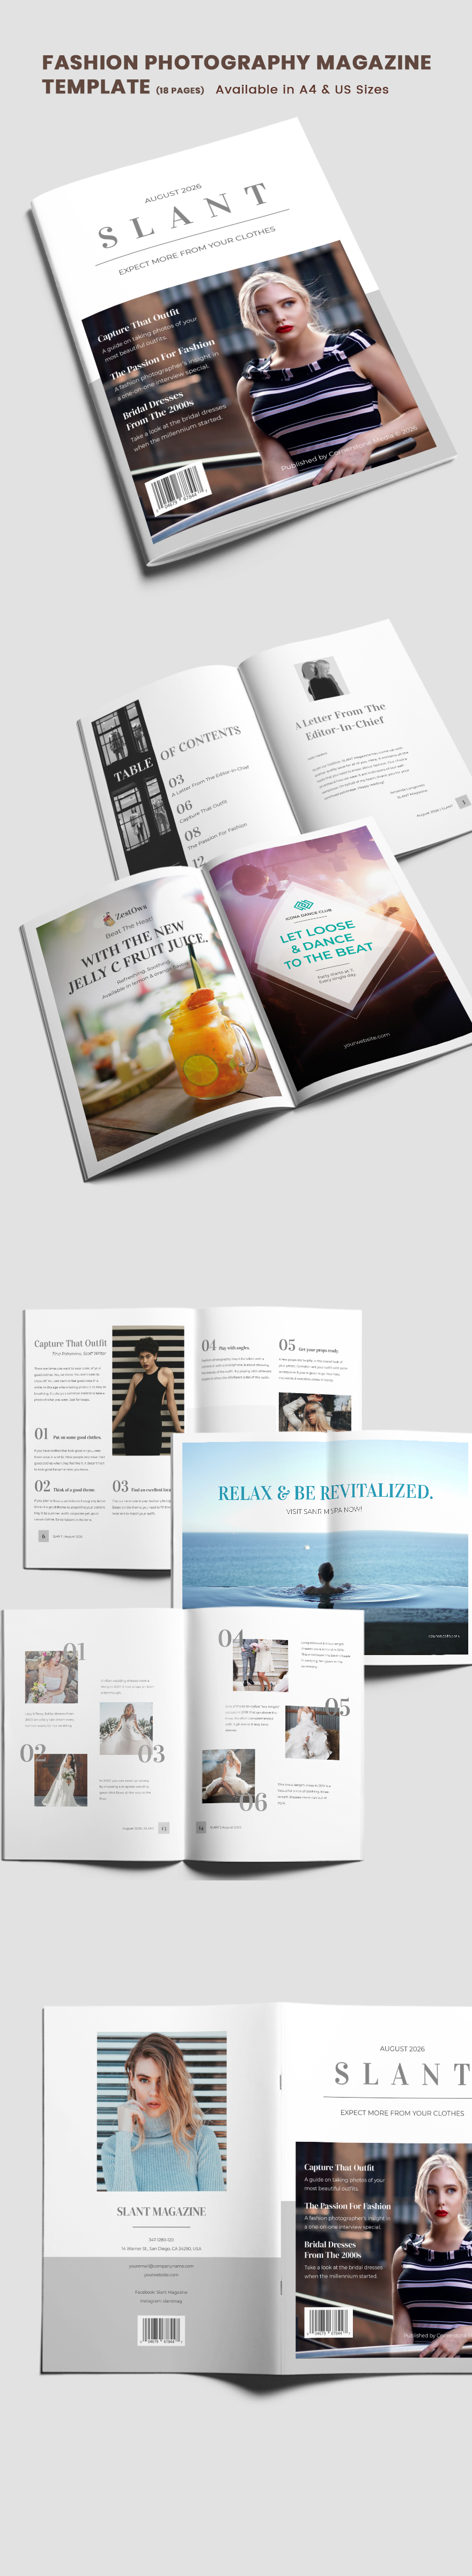 Fashion Magazine Template - InDesign, PSD | Template.net